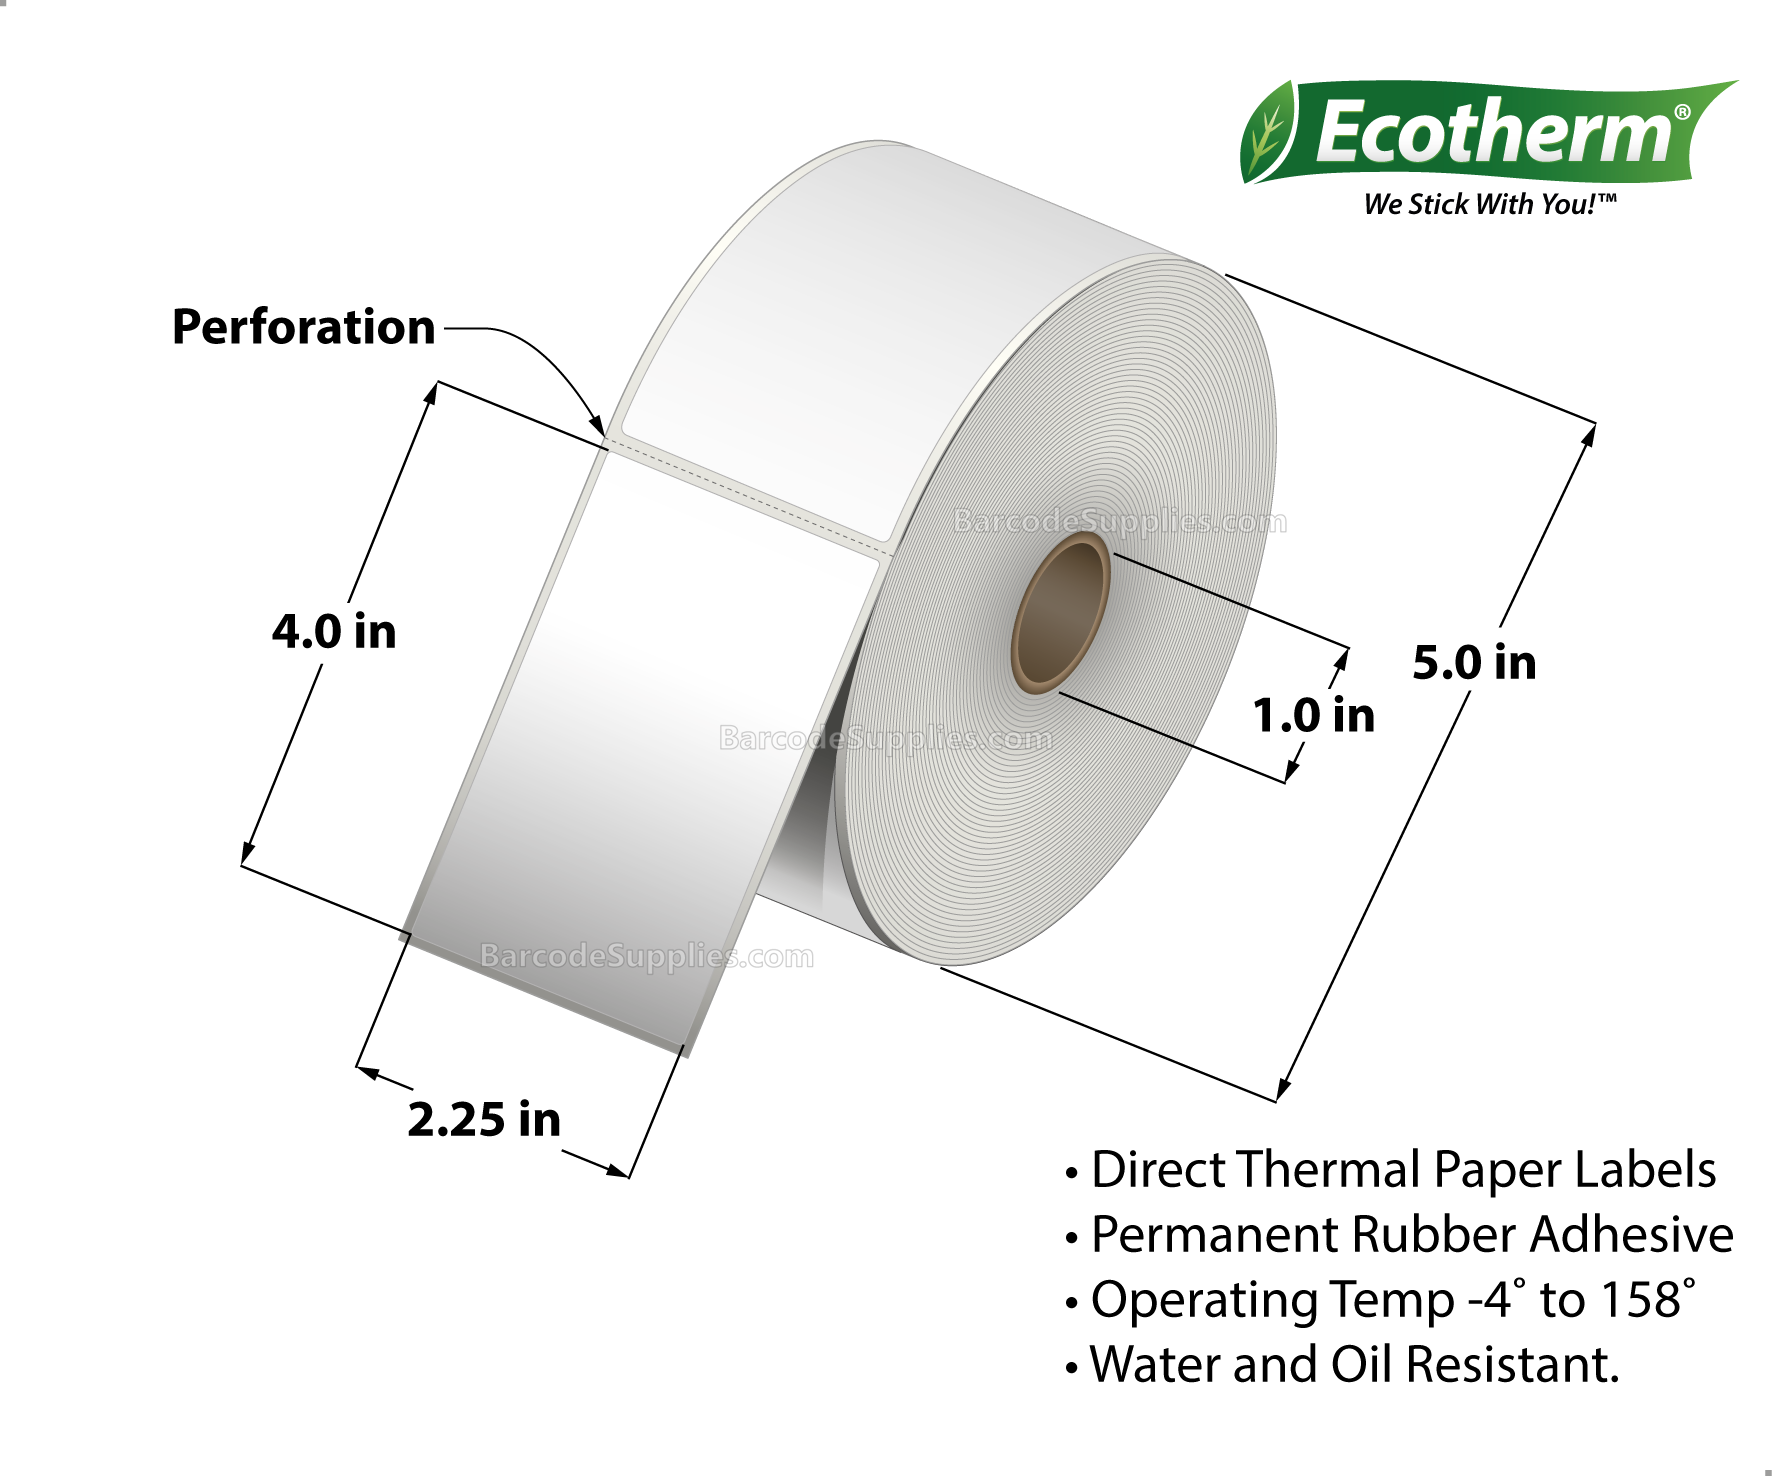 2.25 x 4 Direct Thermal White Labels With Rubber Adhesive - Perforated - 700 Labels Per Roll - Carton Of 6 Rolls - 4200 Labels Total - MPN: ECOTHERM15132-6